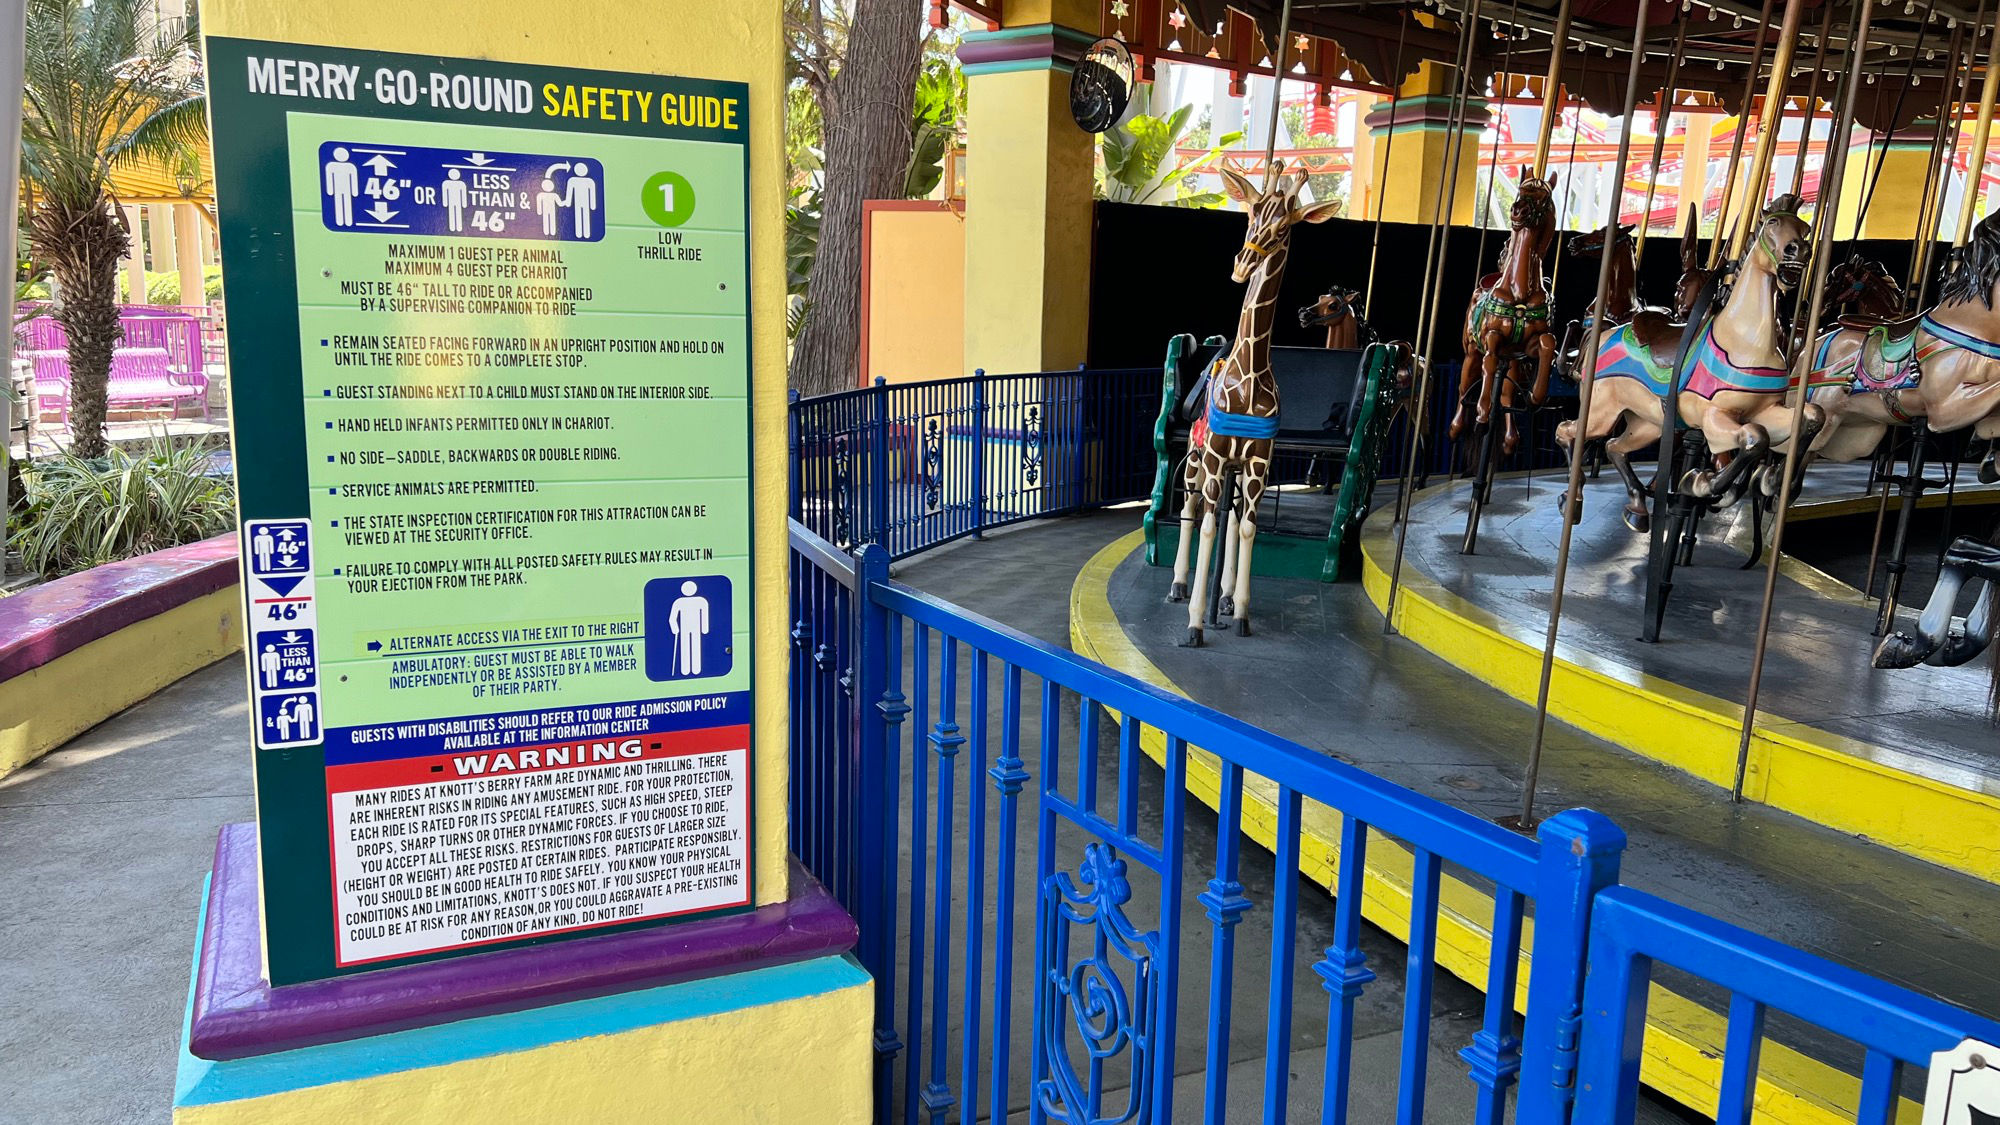 Merry-Go-Round Safety Guide